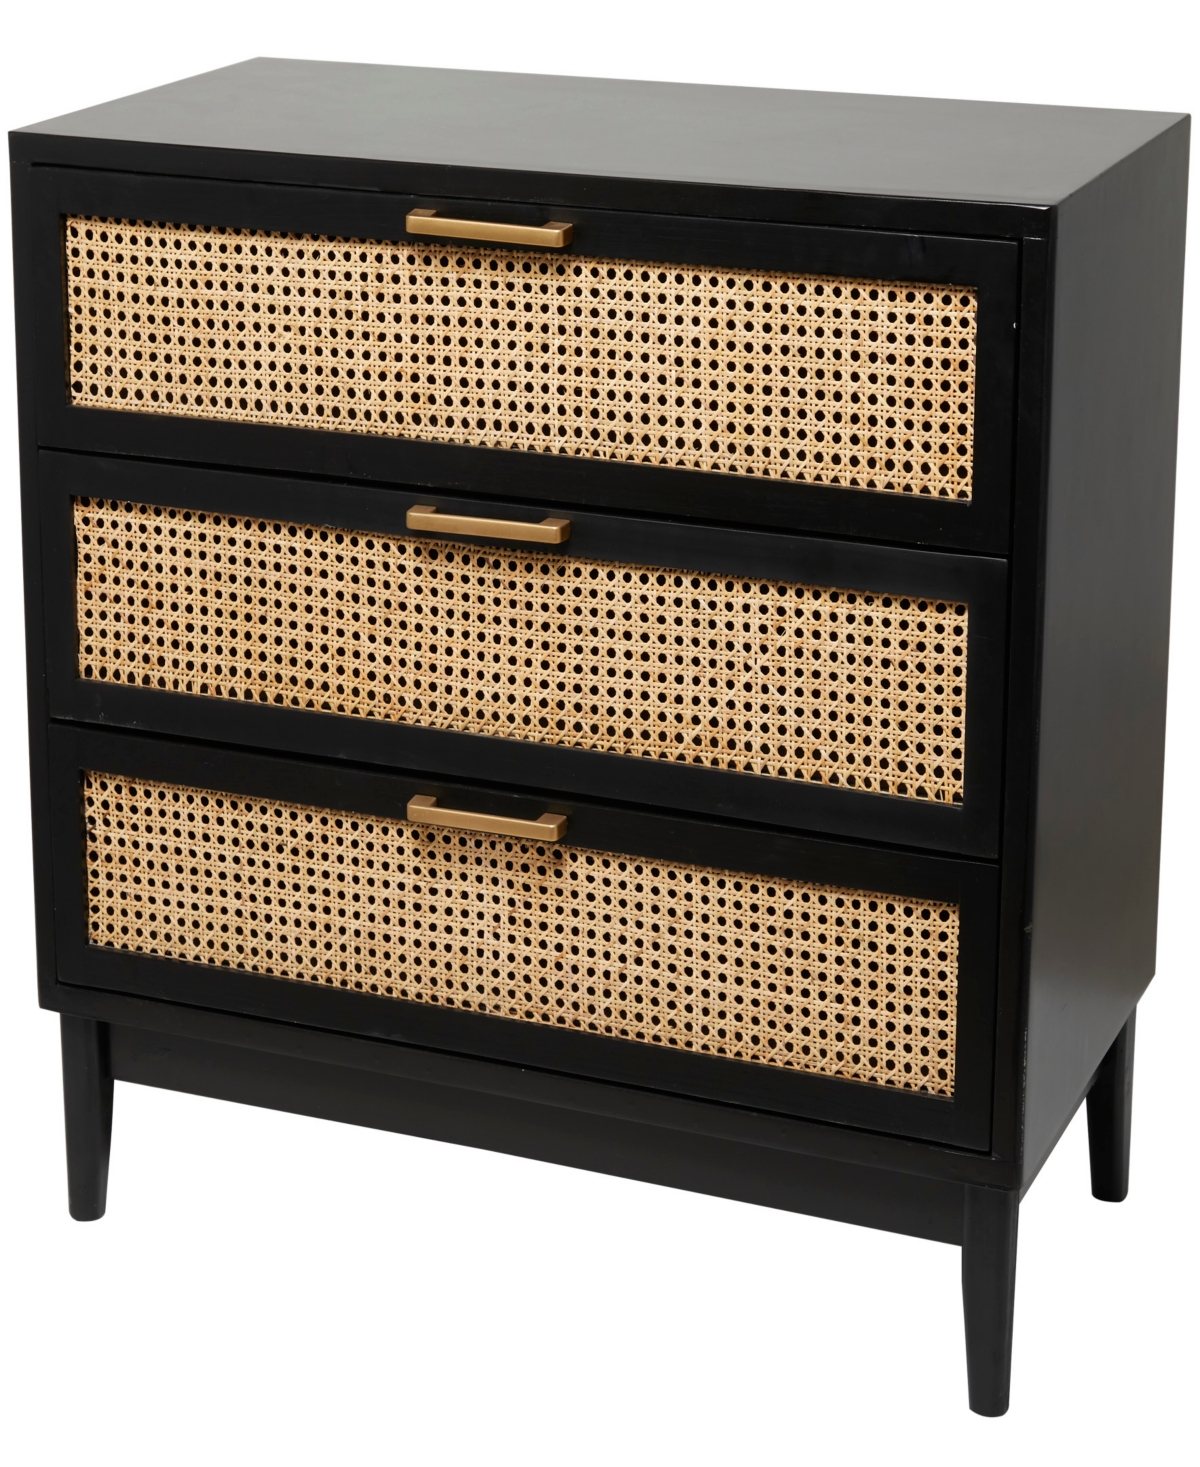 Rosemary Lane 32" Wood 3 Drawer Cabinet With Cane Front Drawers And Gold-tone Handles In Black